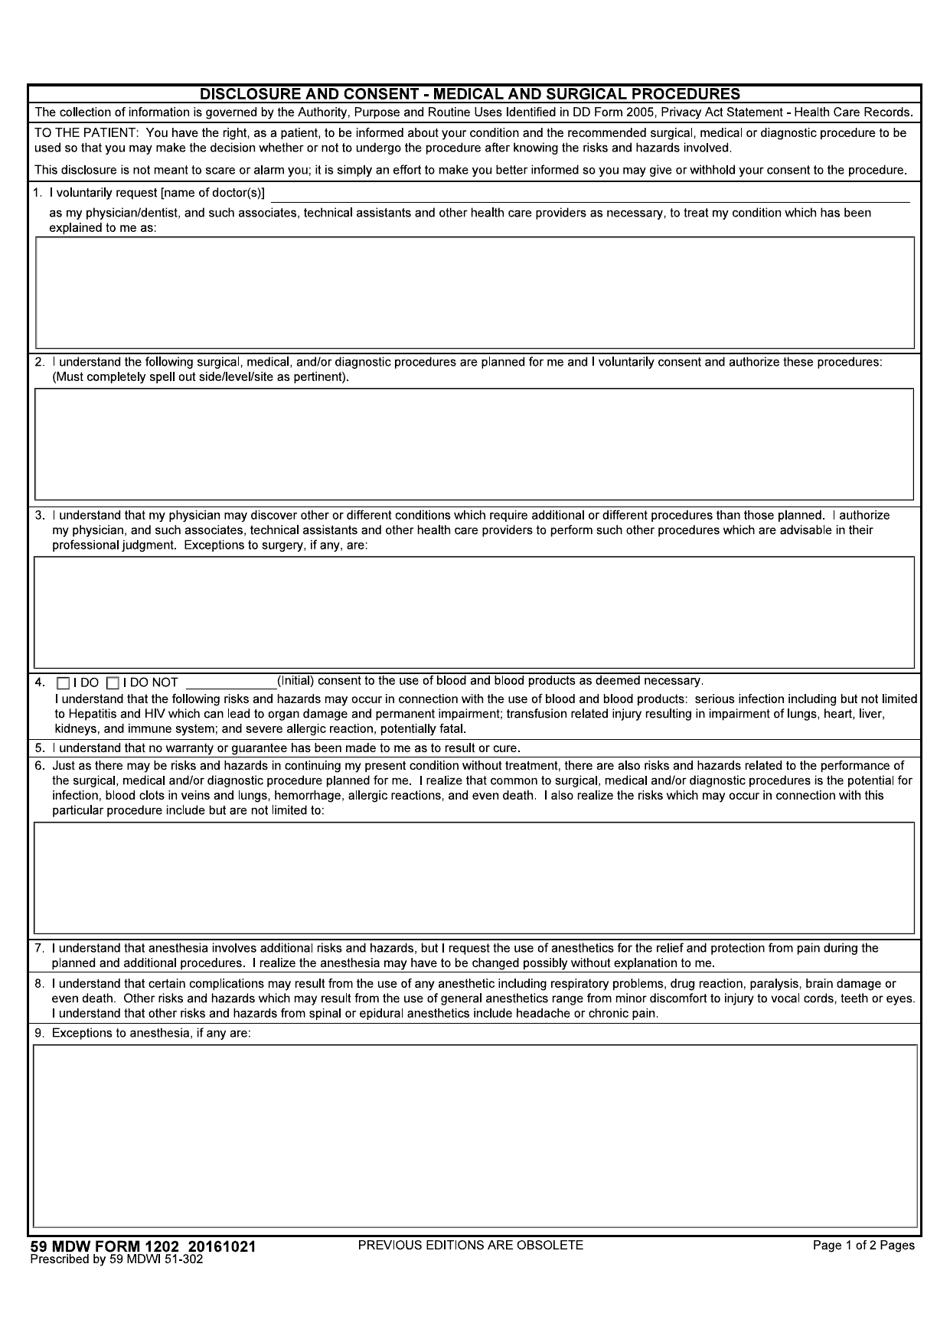 59 MDW Form 1202 Disclosure and Consent - Medical and Surgical Procedures, Page 1